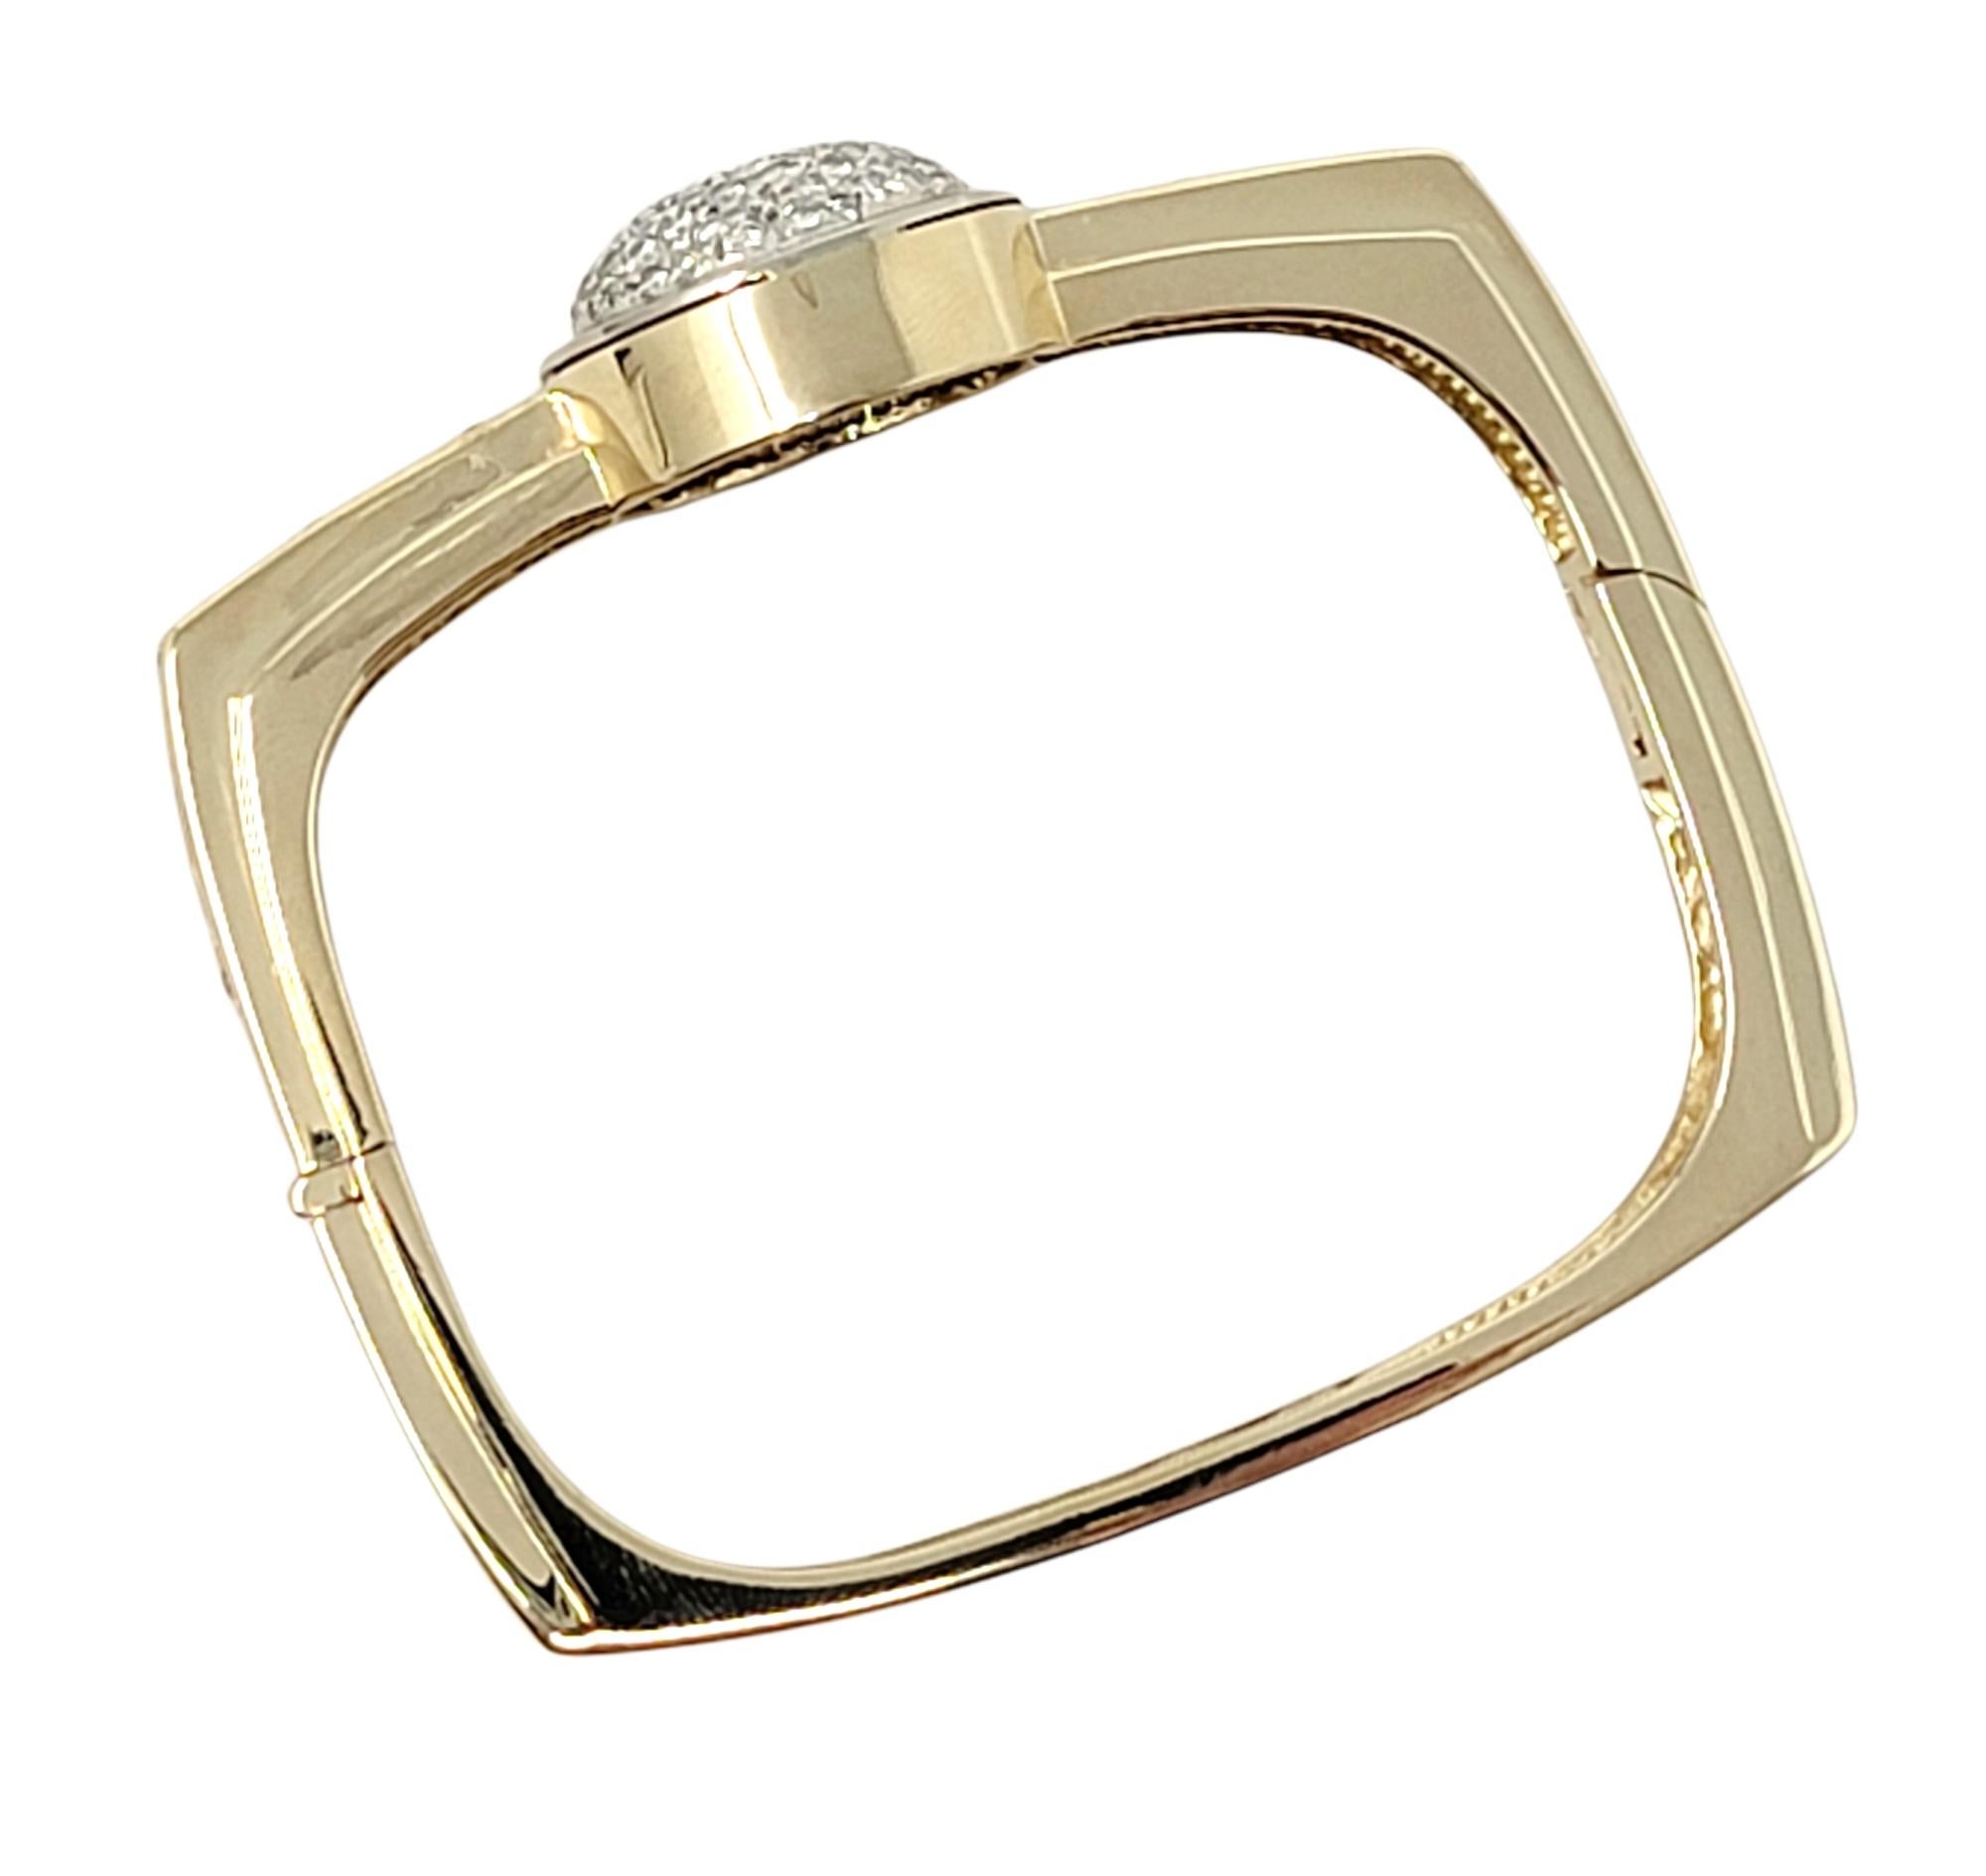 Contemporary Pave Diamond Dome Squared Hinged Bangle Bracelet in 14 Karat Gold For Sale 4